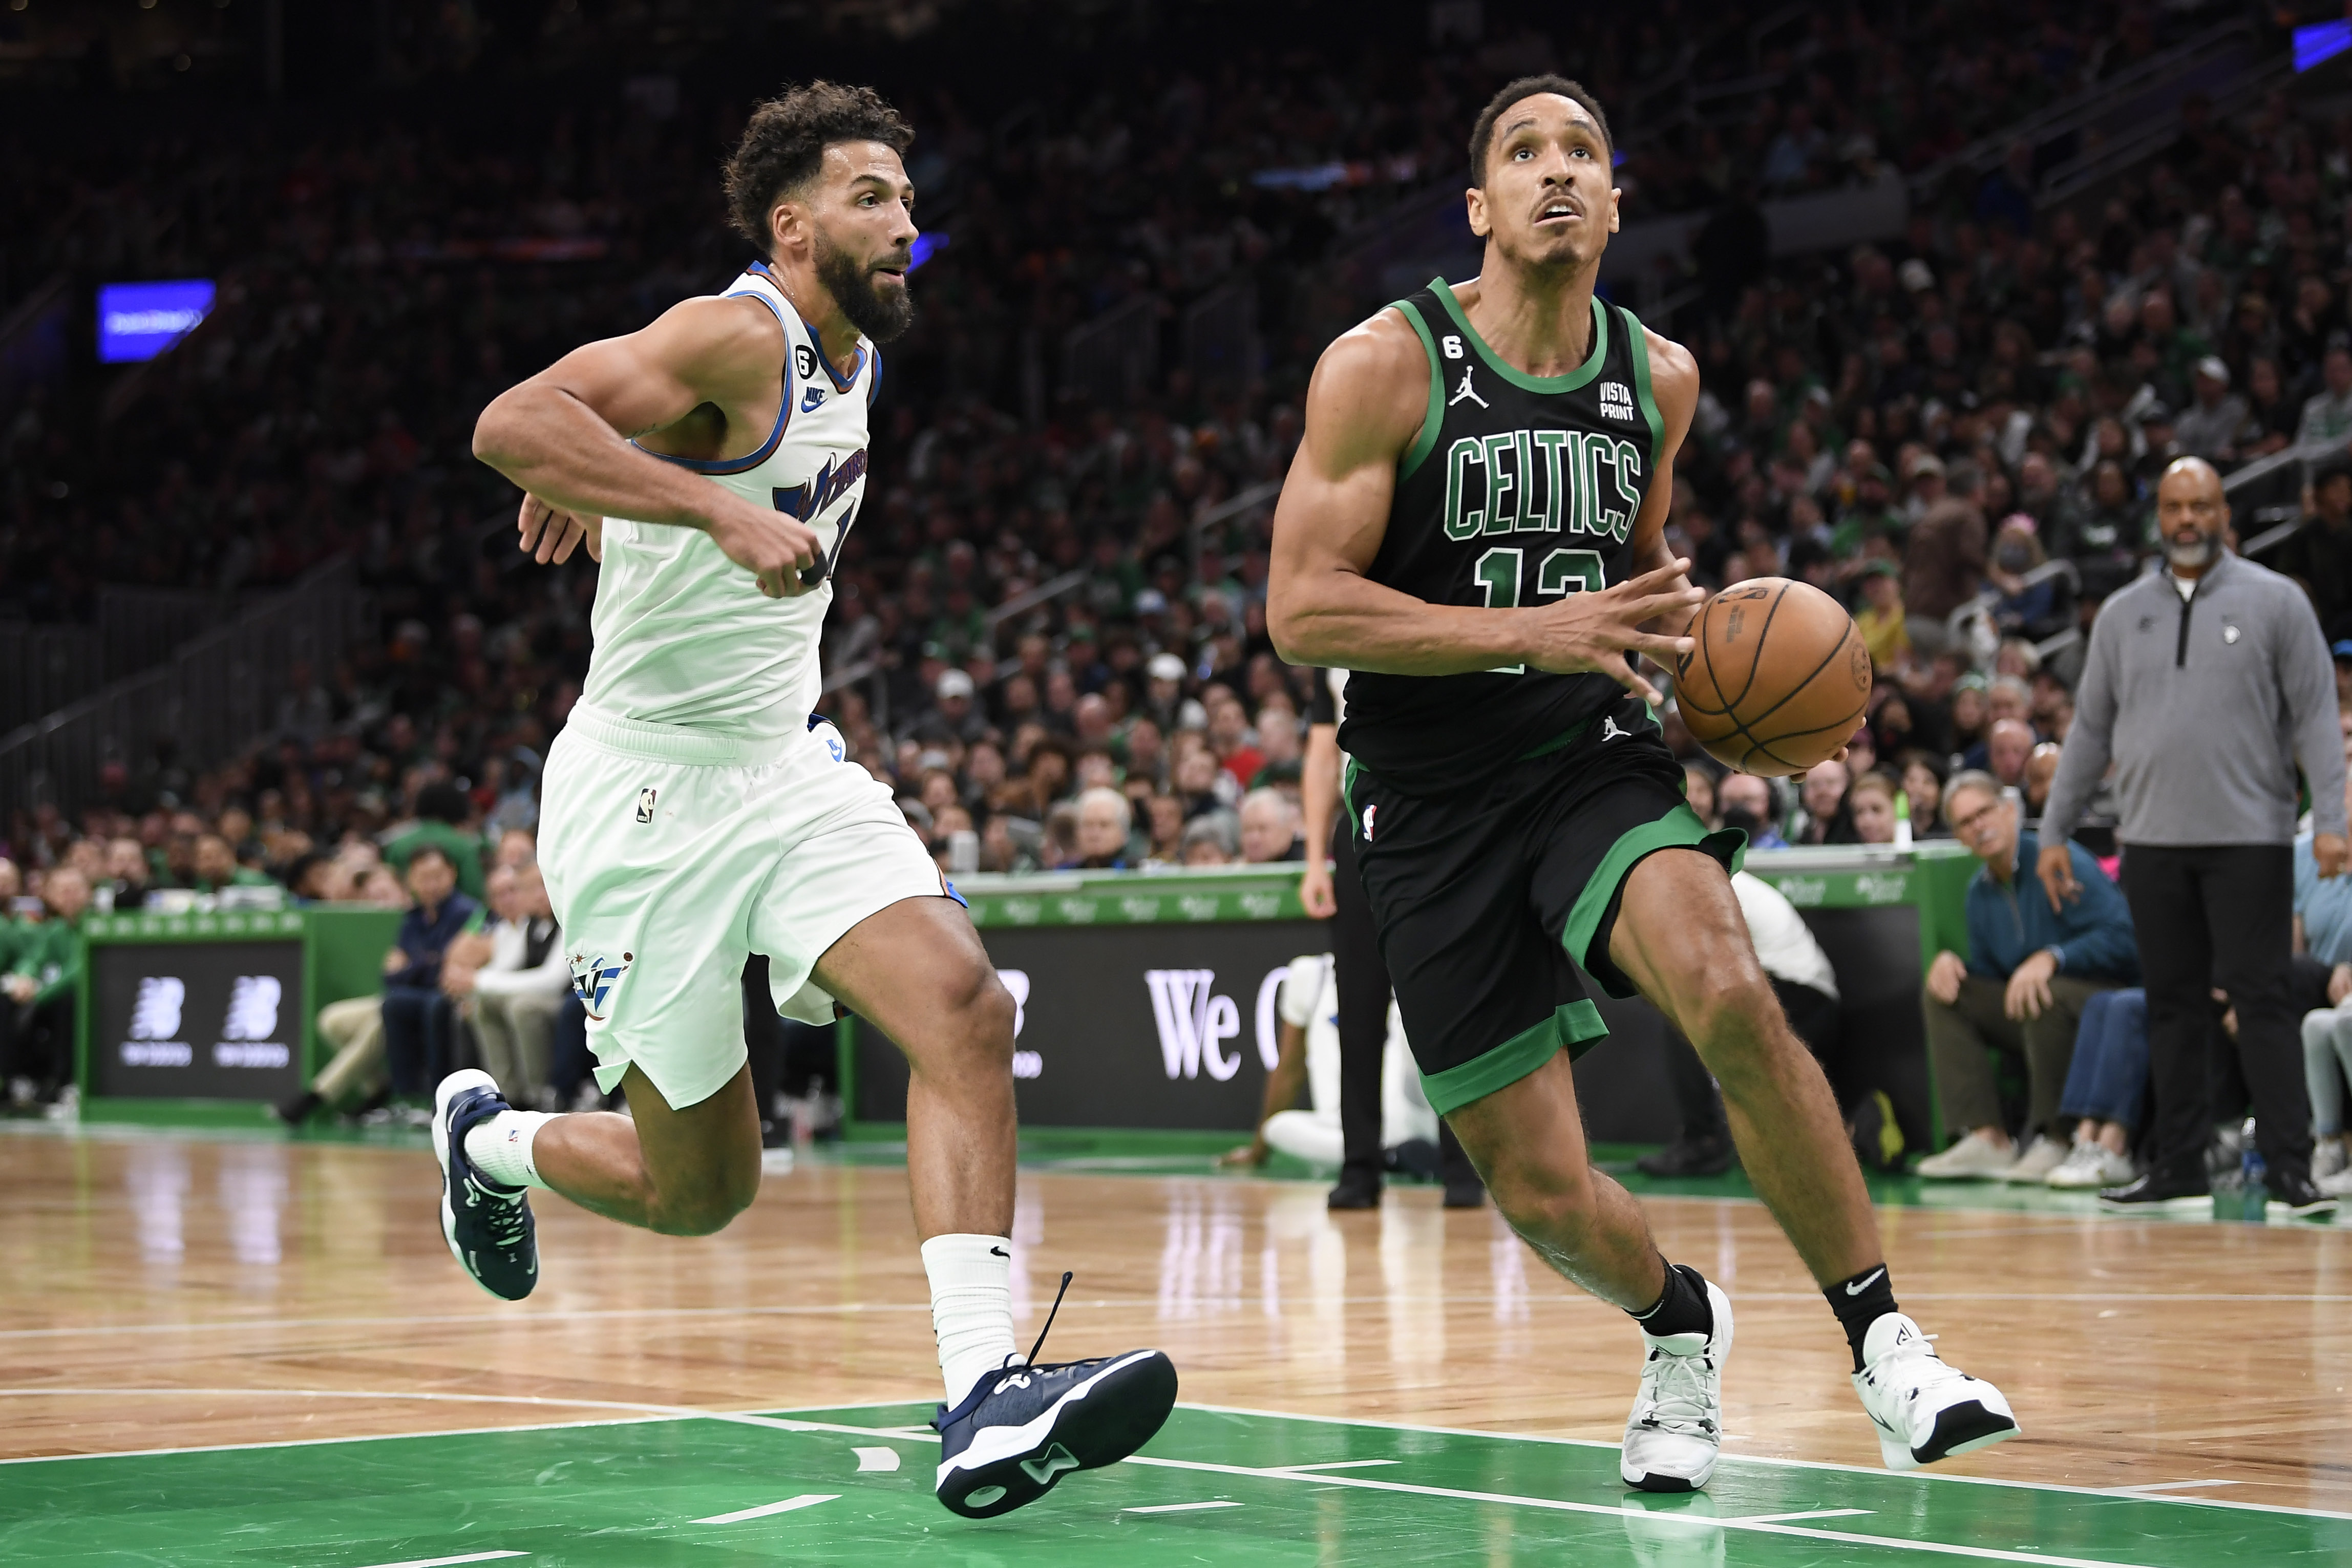 Brown scores 24, Beal struggles as Celtics roll 112-94 - The San